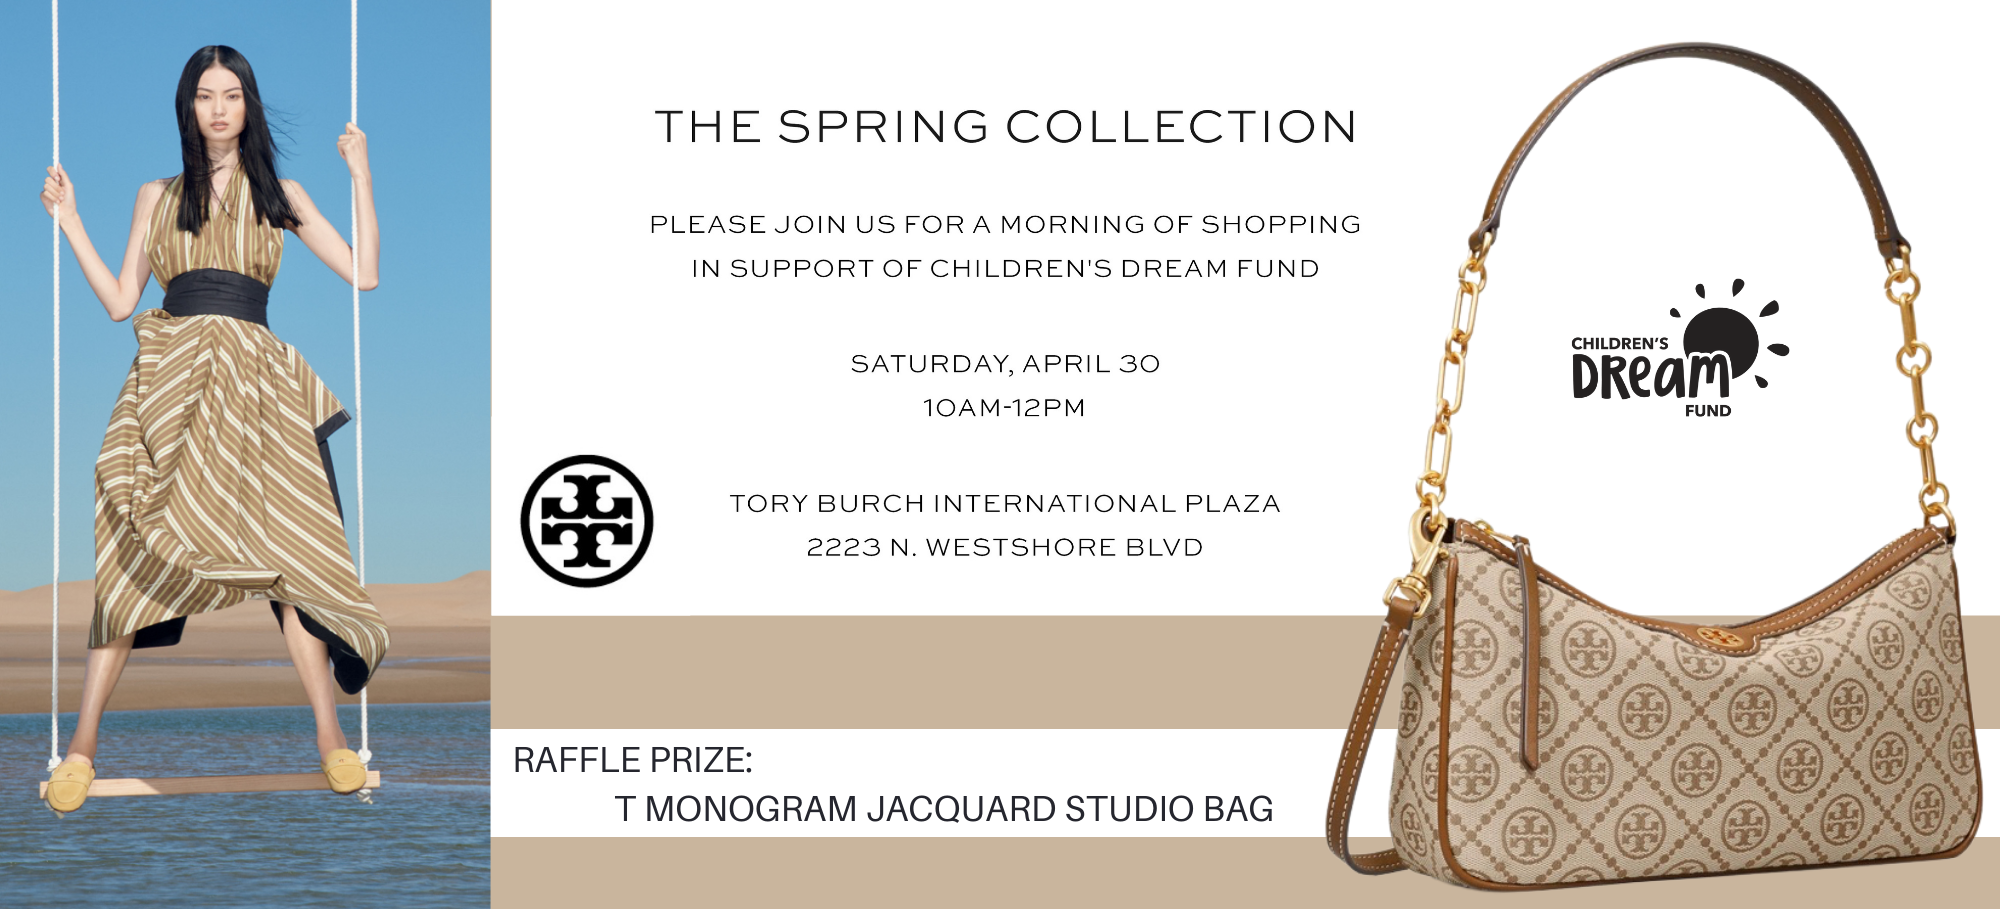 Tory Burch Gives Back | The Children's Dream Fund